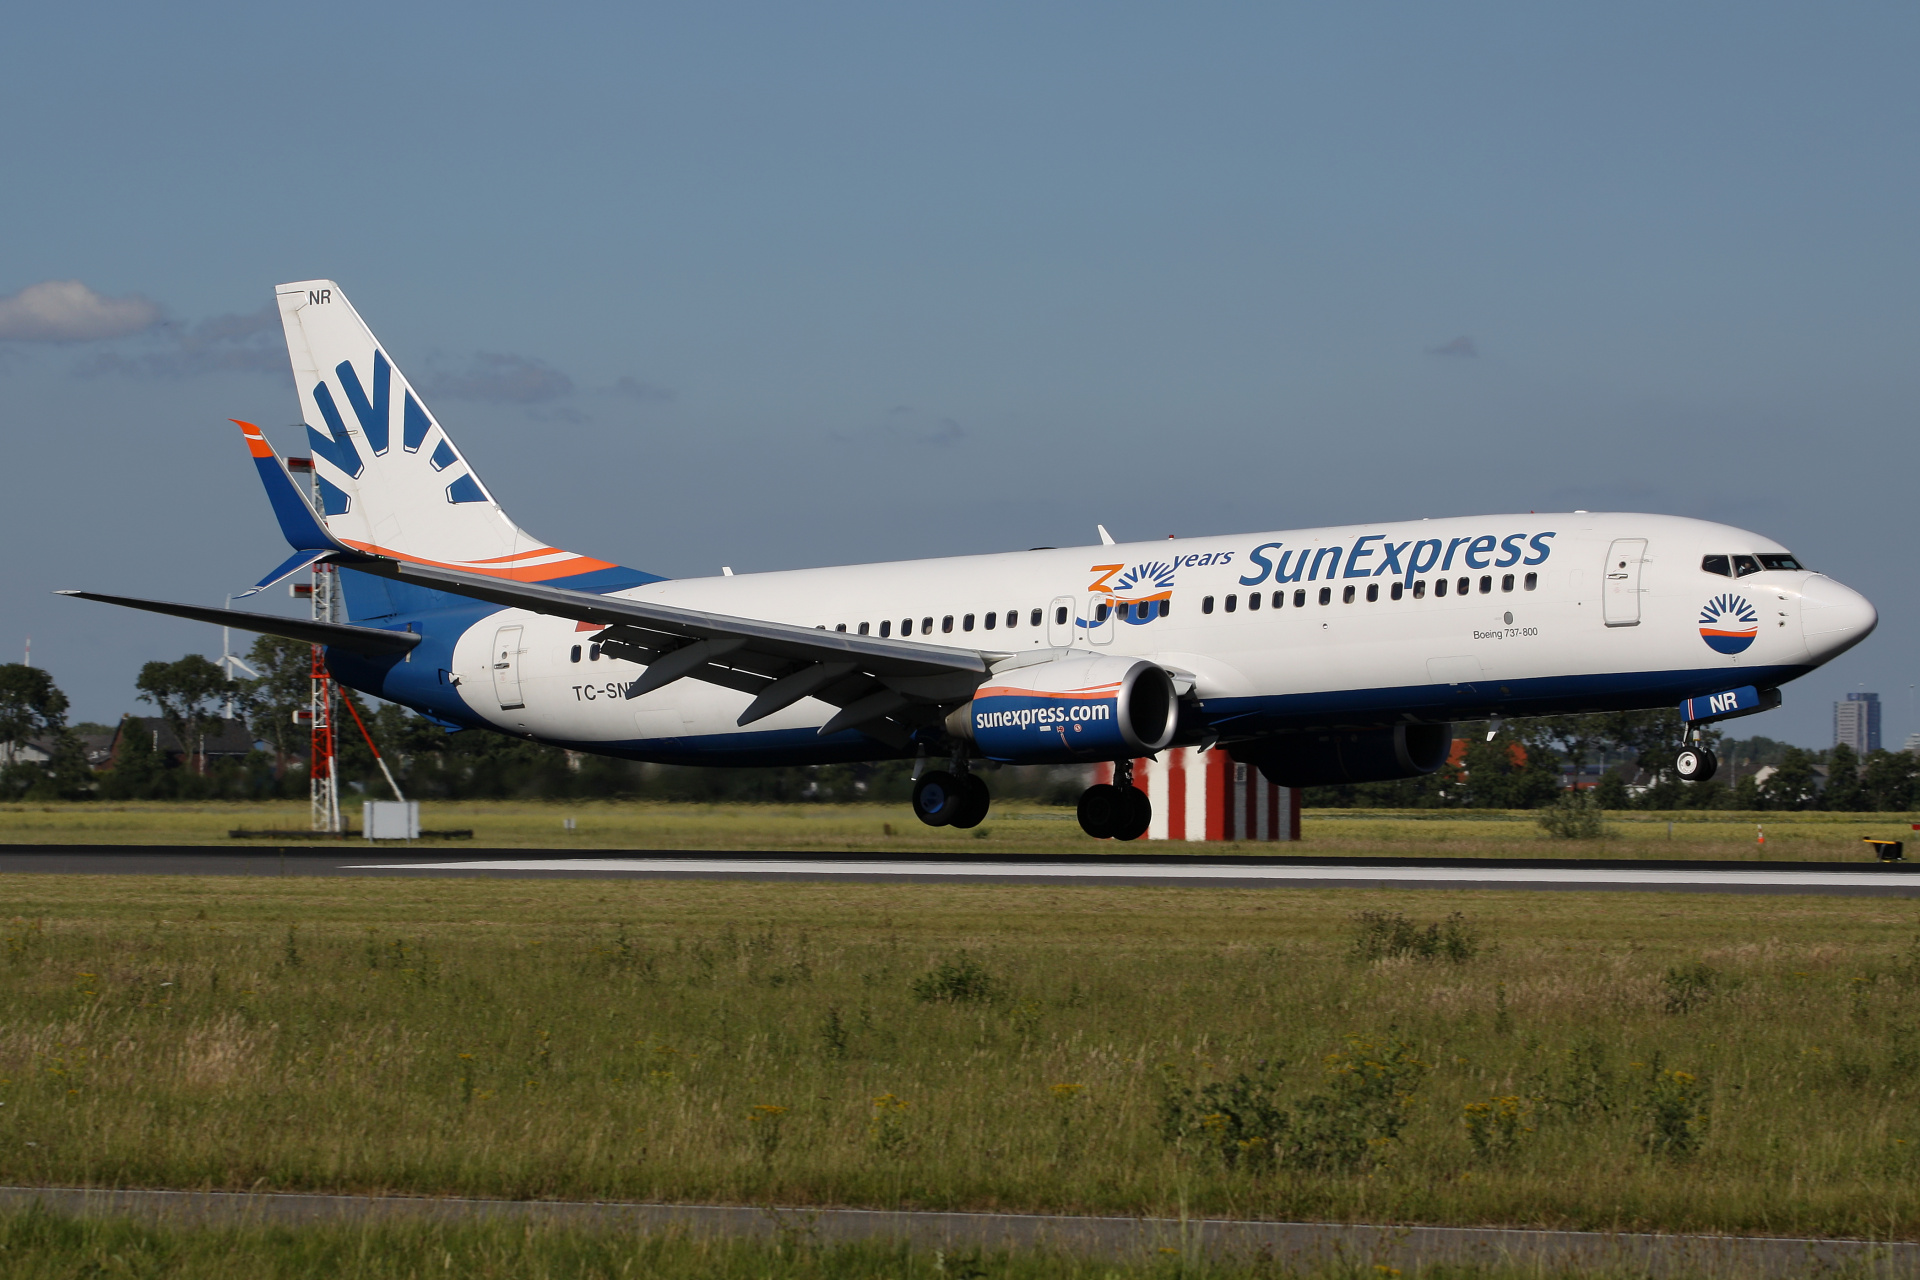 TC-SNR, SunExpress (30 years livery) (Aircraft » Schiphol Spotting » Boeing 737-800)